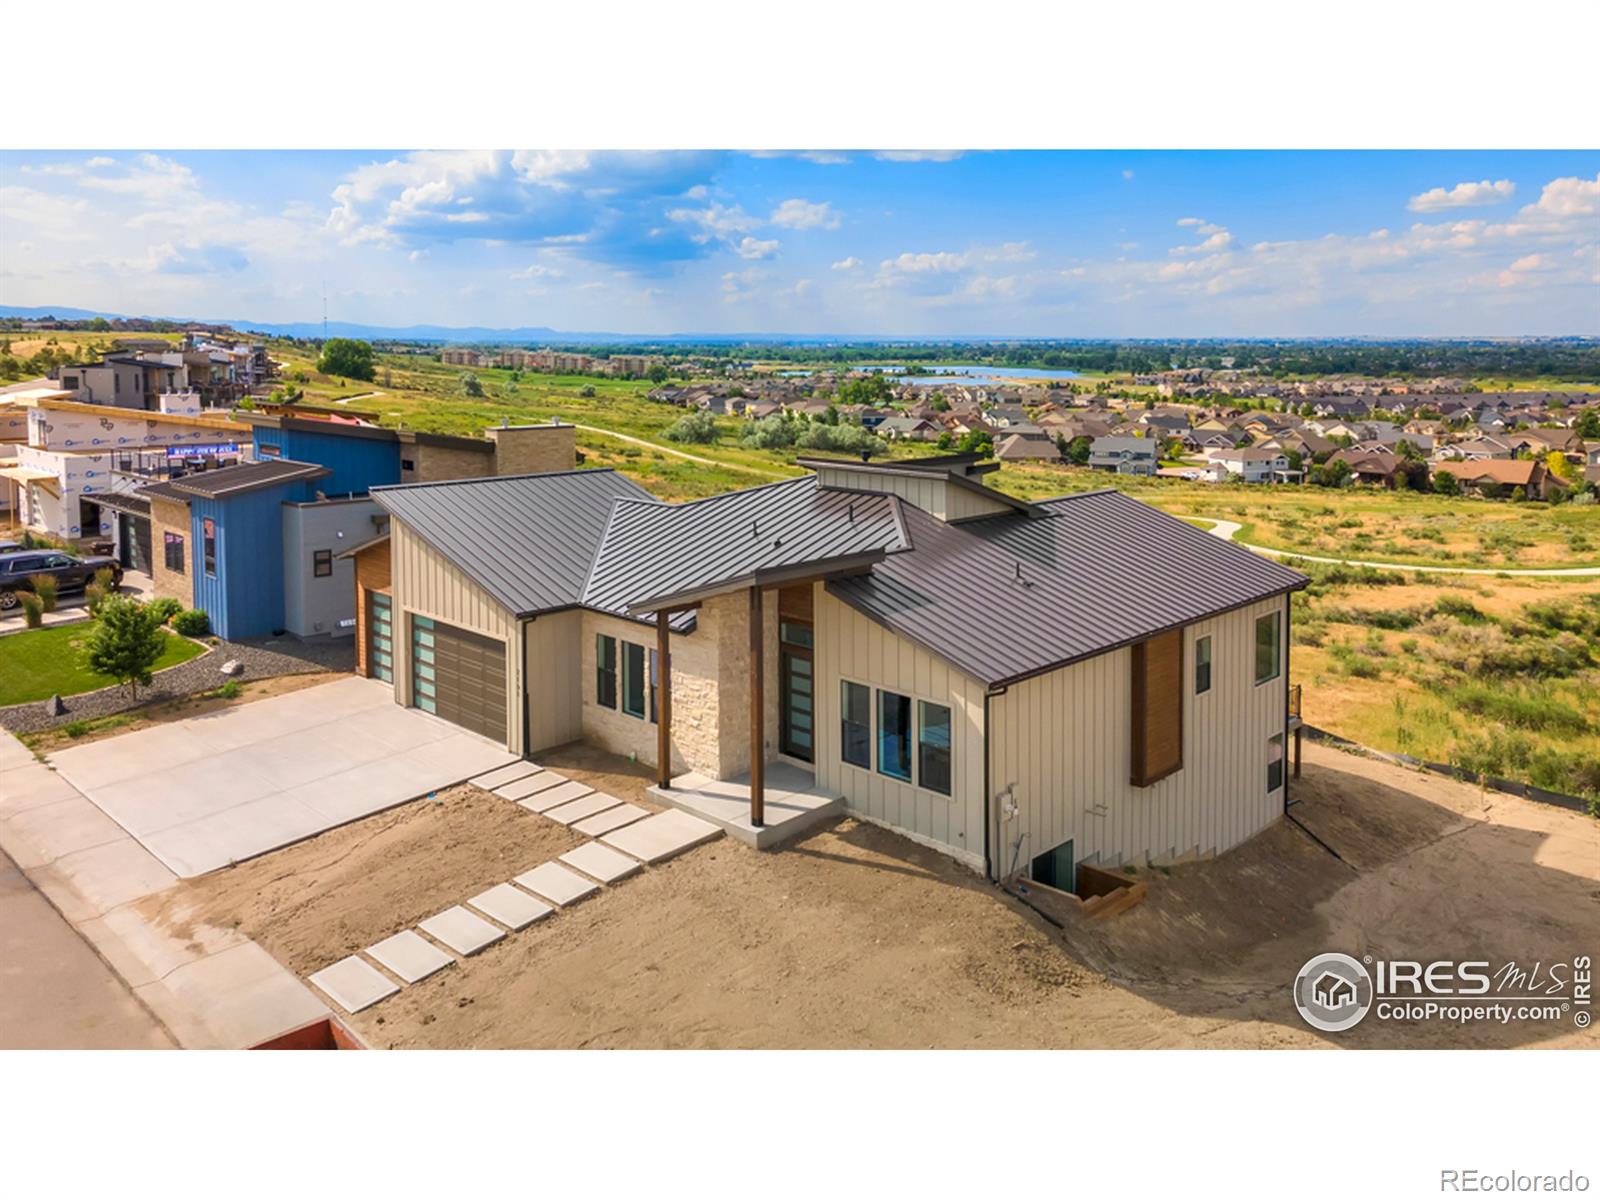 2151 Picture Pointe, Windsor, CO